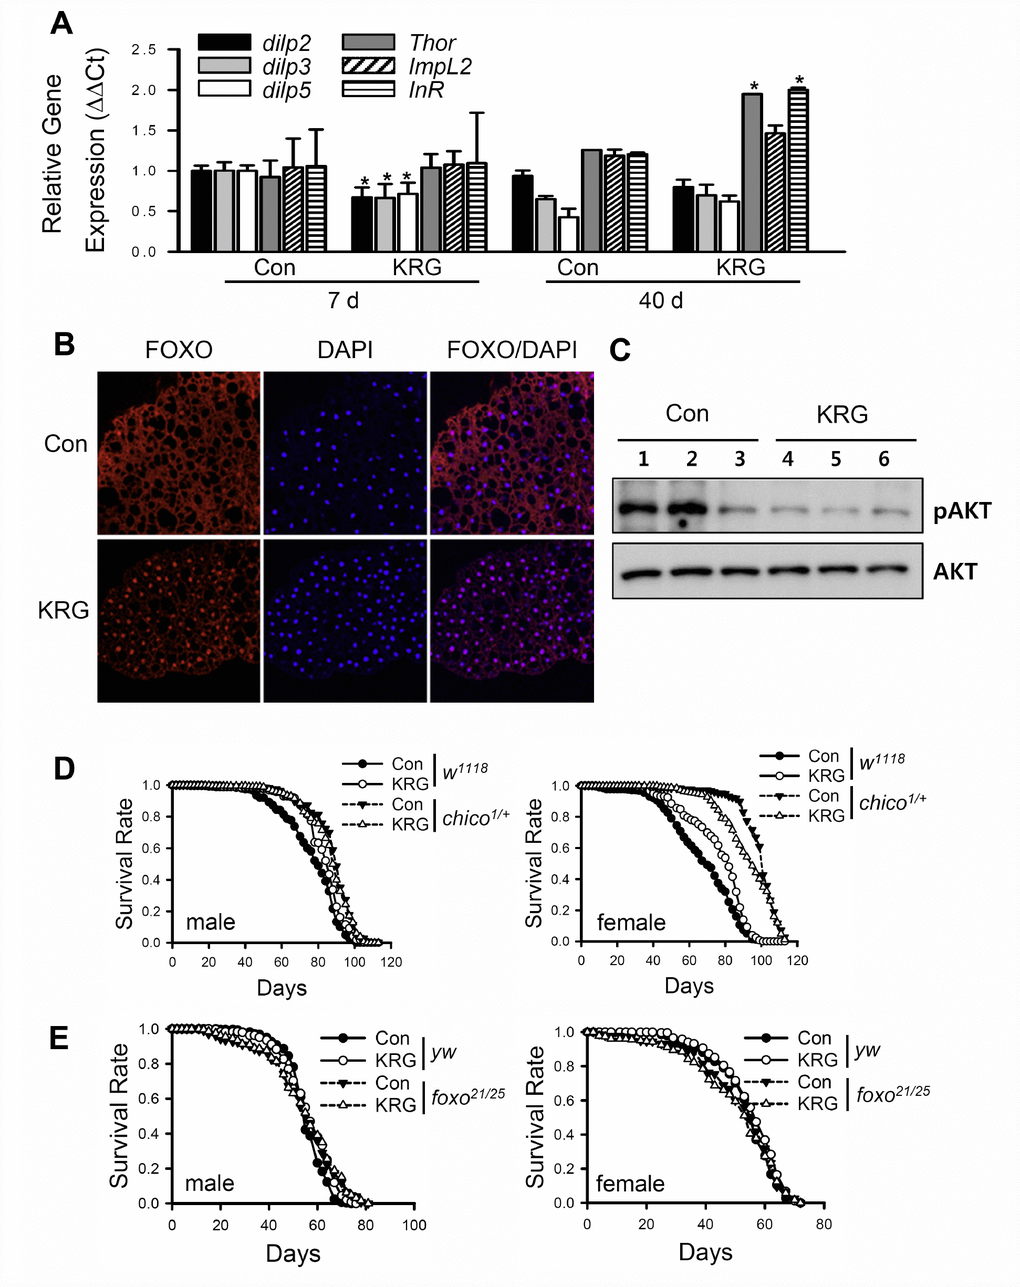 Lifespan extension by KRG is mediated through the IIS pathway. (A) mRNA levels of dilps and target genes of dFOXO were analyzed in fruit flies fed a KRG-containing diet or a control diet for 7 or 40 days. *p B) Translocalization of dFOXO to the nucleus following supplementation of diet with KRG. The abdominal fat body was stained with anti-dFOXO (red) and DAPI (blue). Original magnification is 200×. (C) The level of phosphorylated Akt (pAkt)/Akt of flies fed a KRG-containing diet (lane 4, 5, 6) or a control diet (lane 1, 2, 3). (D) Survival of heterozygous mutant chico flies (chico1/+, dashed lines) and control flies (w1118, solid lines) fed a KRG-containing diet (lines with open dots) or a control diet (lines with closed dots). (E) Survival of transheterozygous mutant dFOXO flies (foxo21/25, dashed lines) and control flies (yw, solid lines) fed a KRG-containing diet (lines with open dots) or a control diet (lines with closed dots).